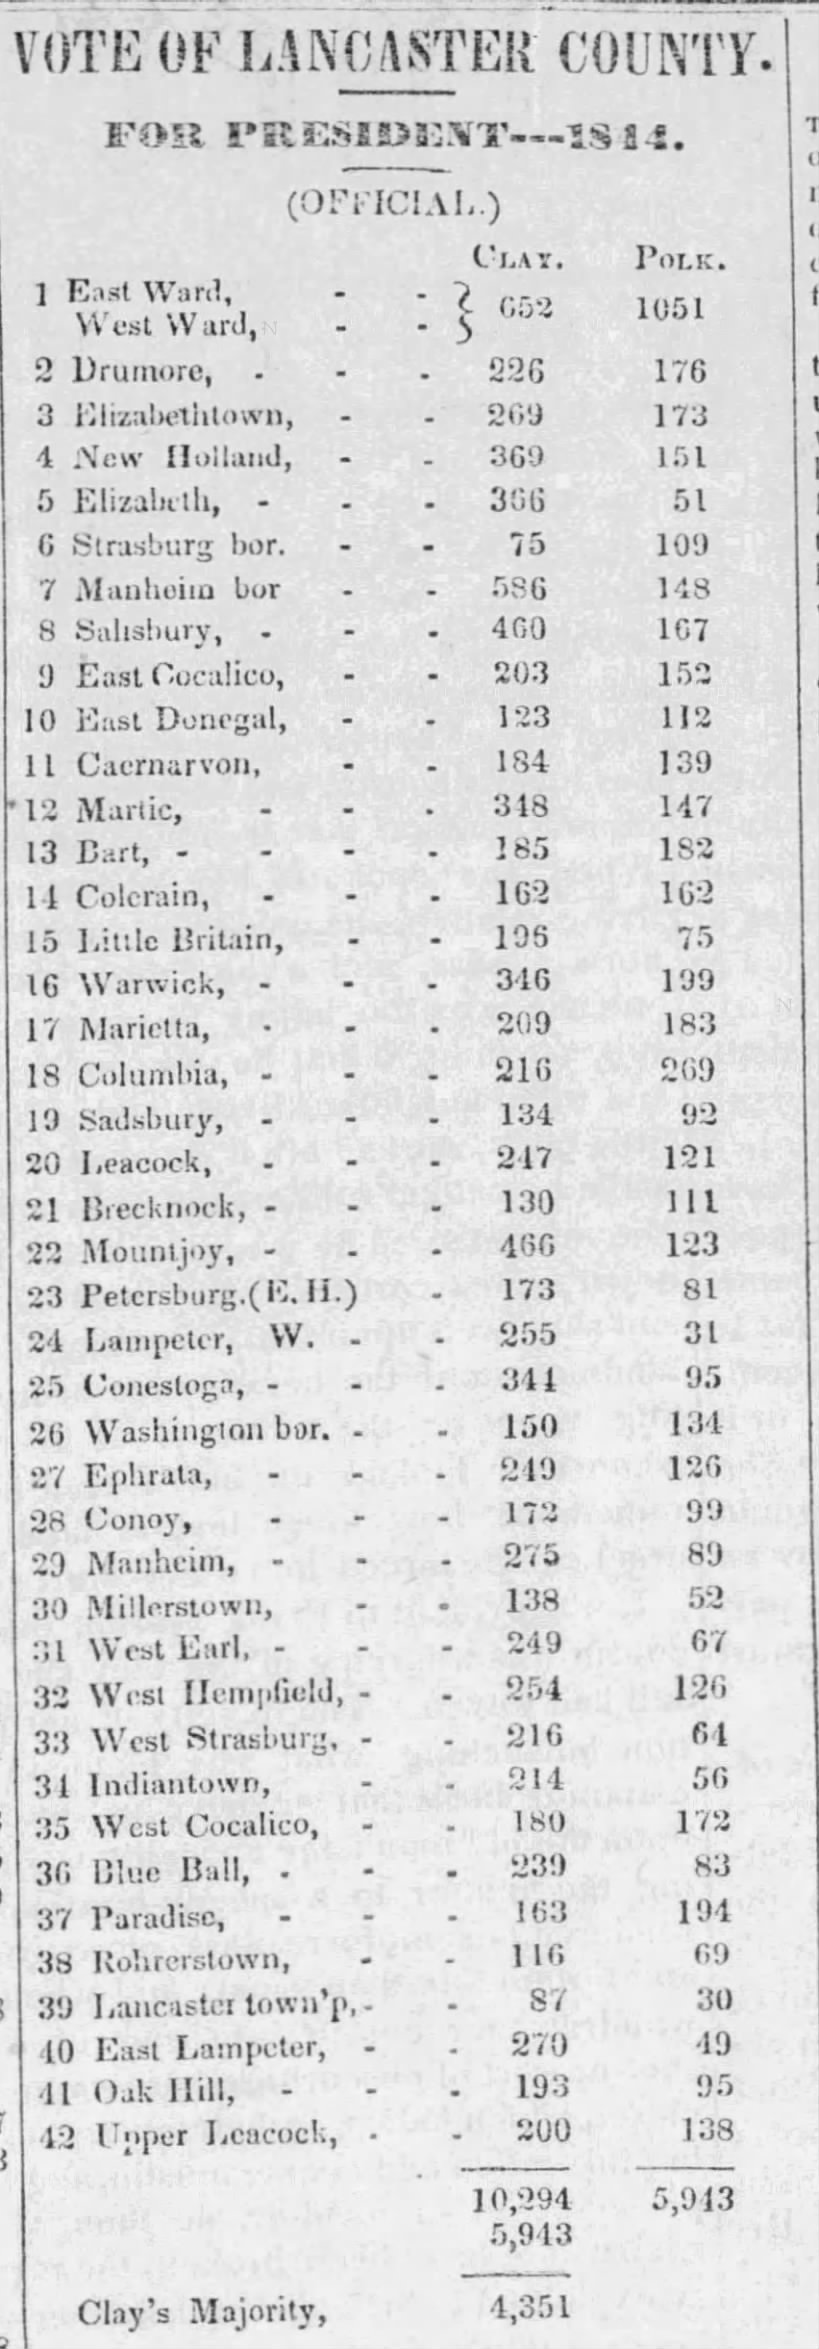 Lancaster County, PA election results, 1844 full